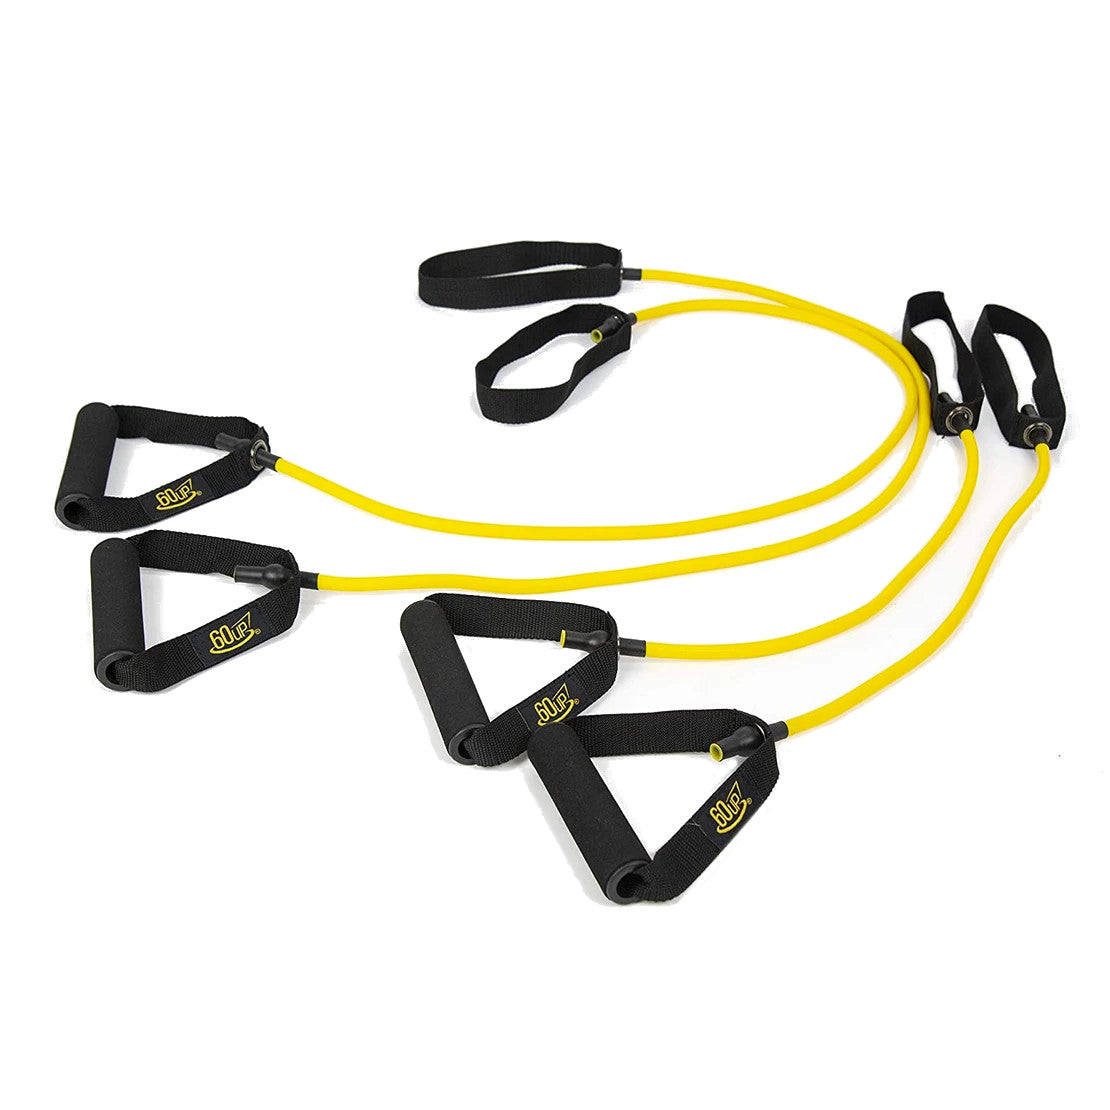 60uP® "Intro" Resistance Bands (Level 1)